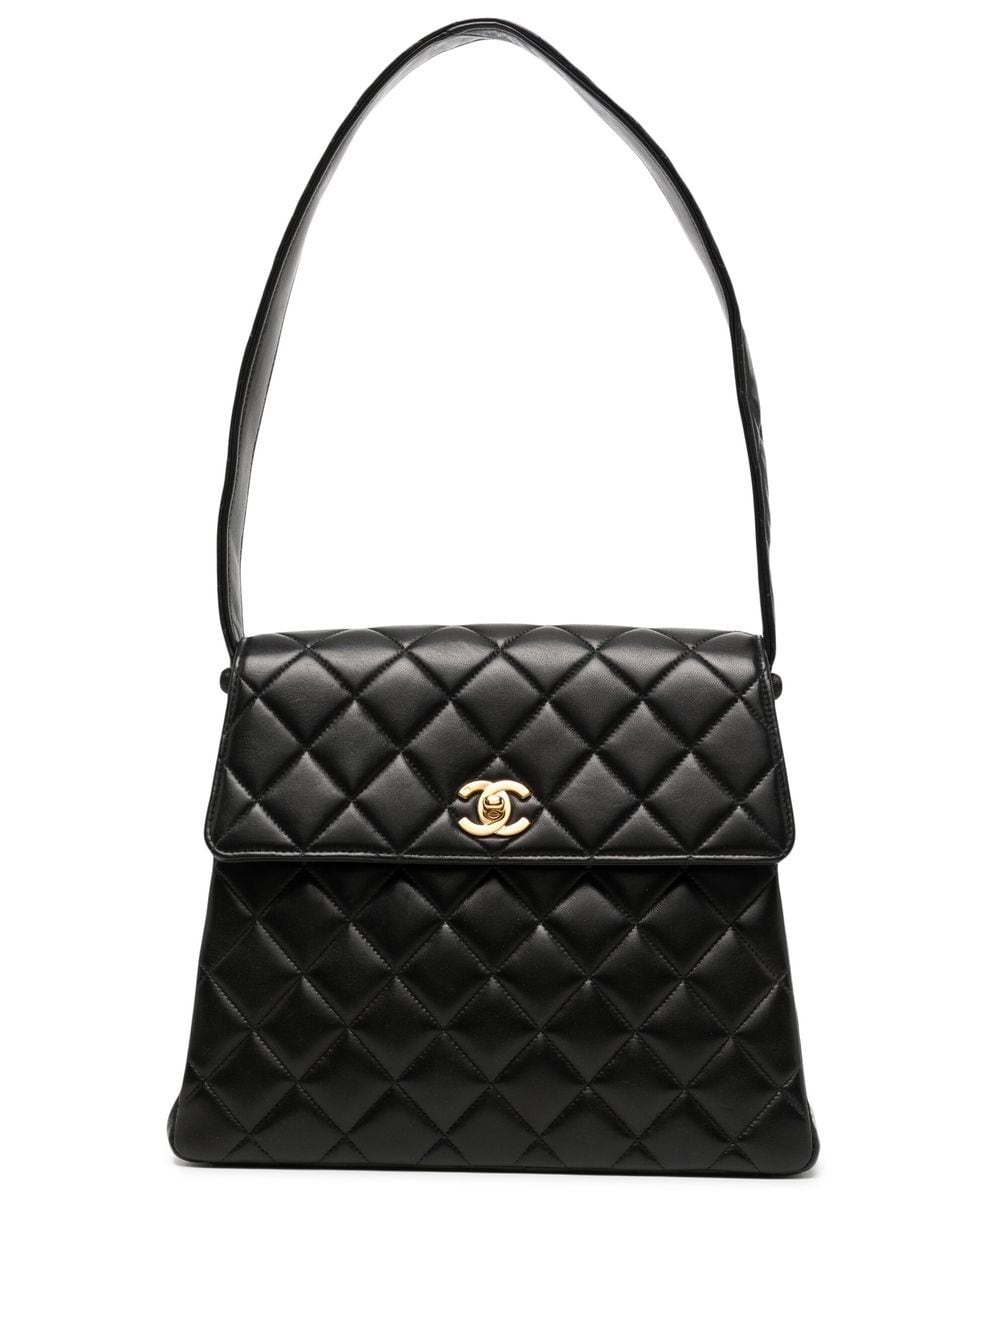 CHANEL Pre-Owned 1997 diamond-quilted Flap Shoulder Bag - Farfetch